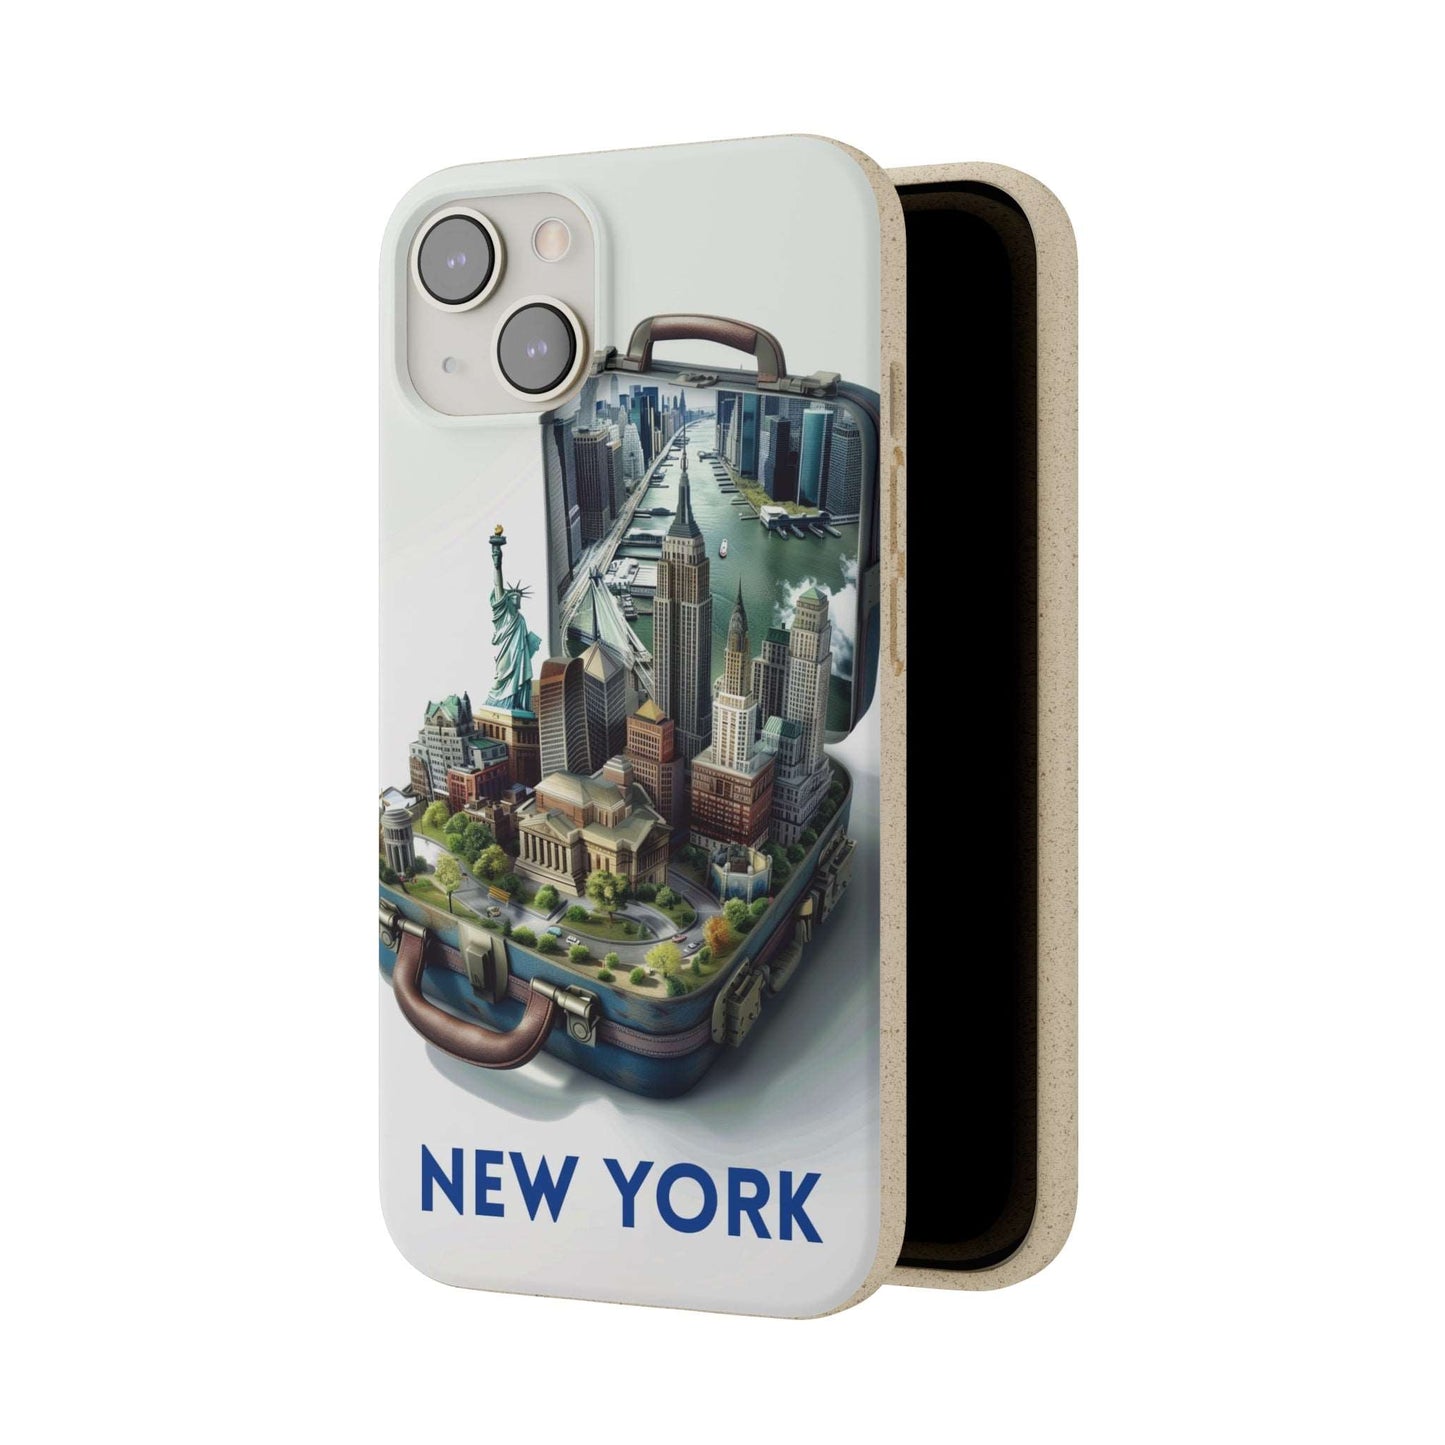 New York phone case made from sustainable plant-based materials and bamboo fibers. Biodegradable and wireless charging compatible